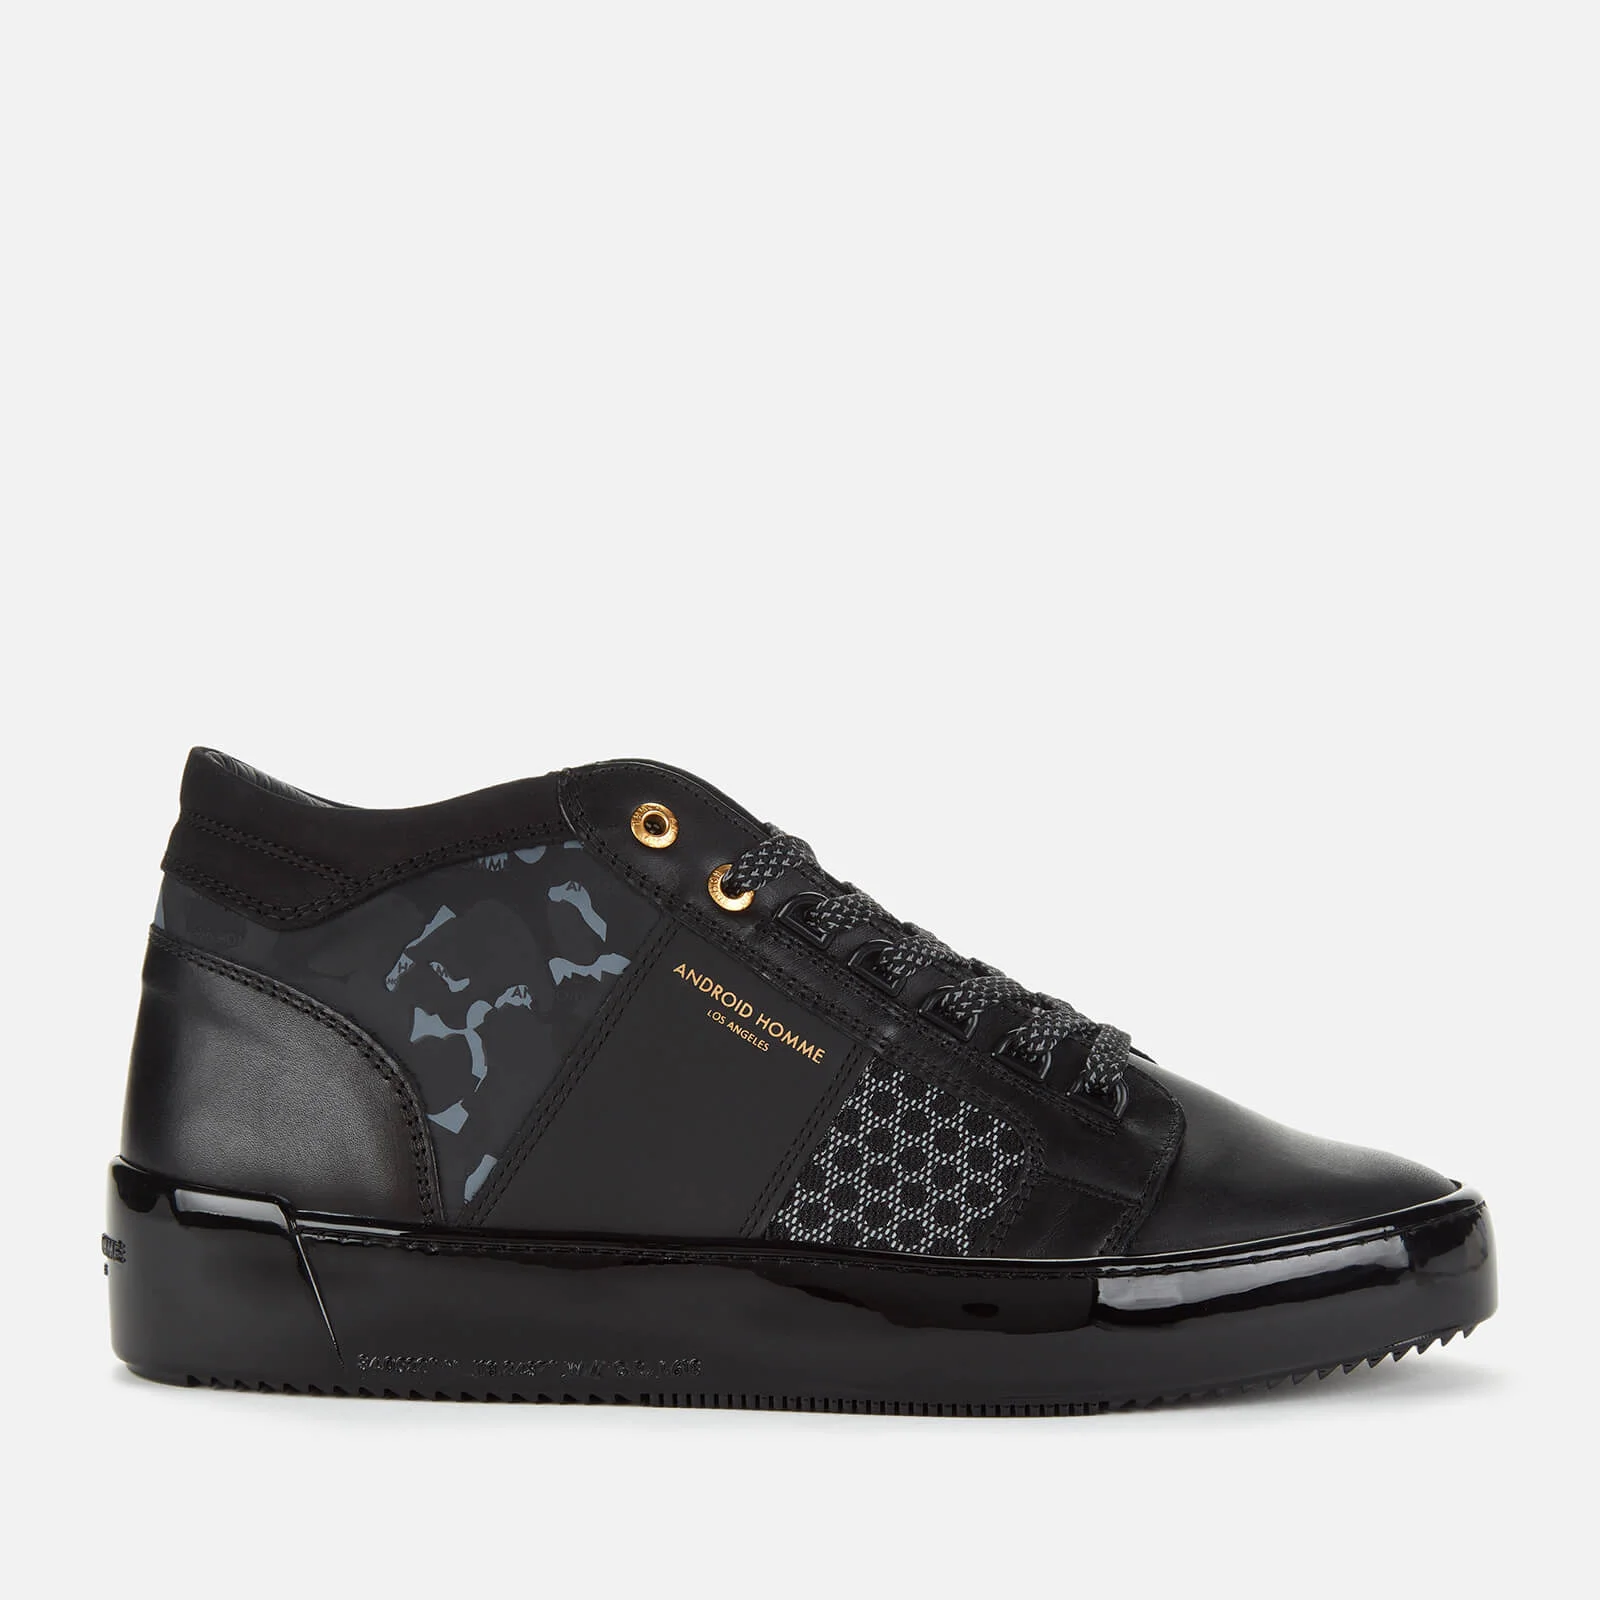 Android Homme Men's Propulsion Mid Geo Camo Trainers - Black Image 1